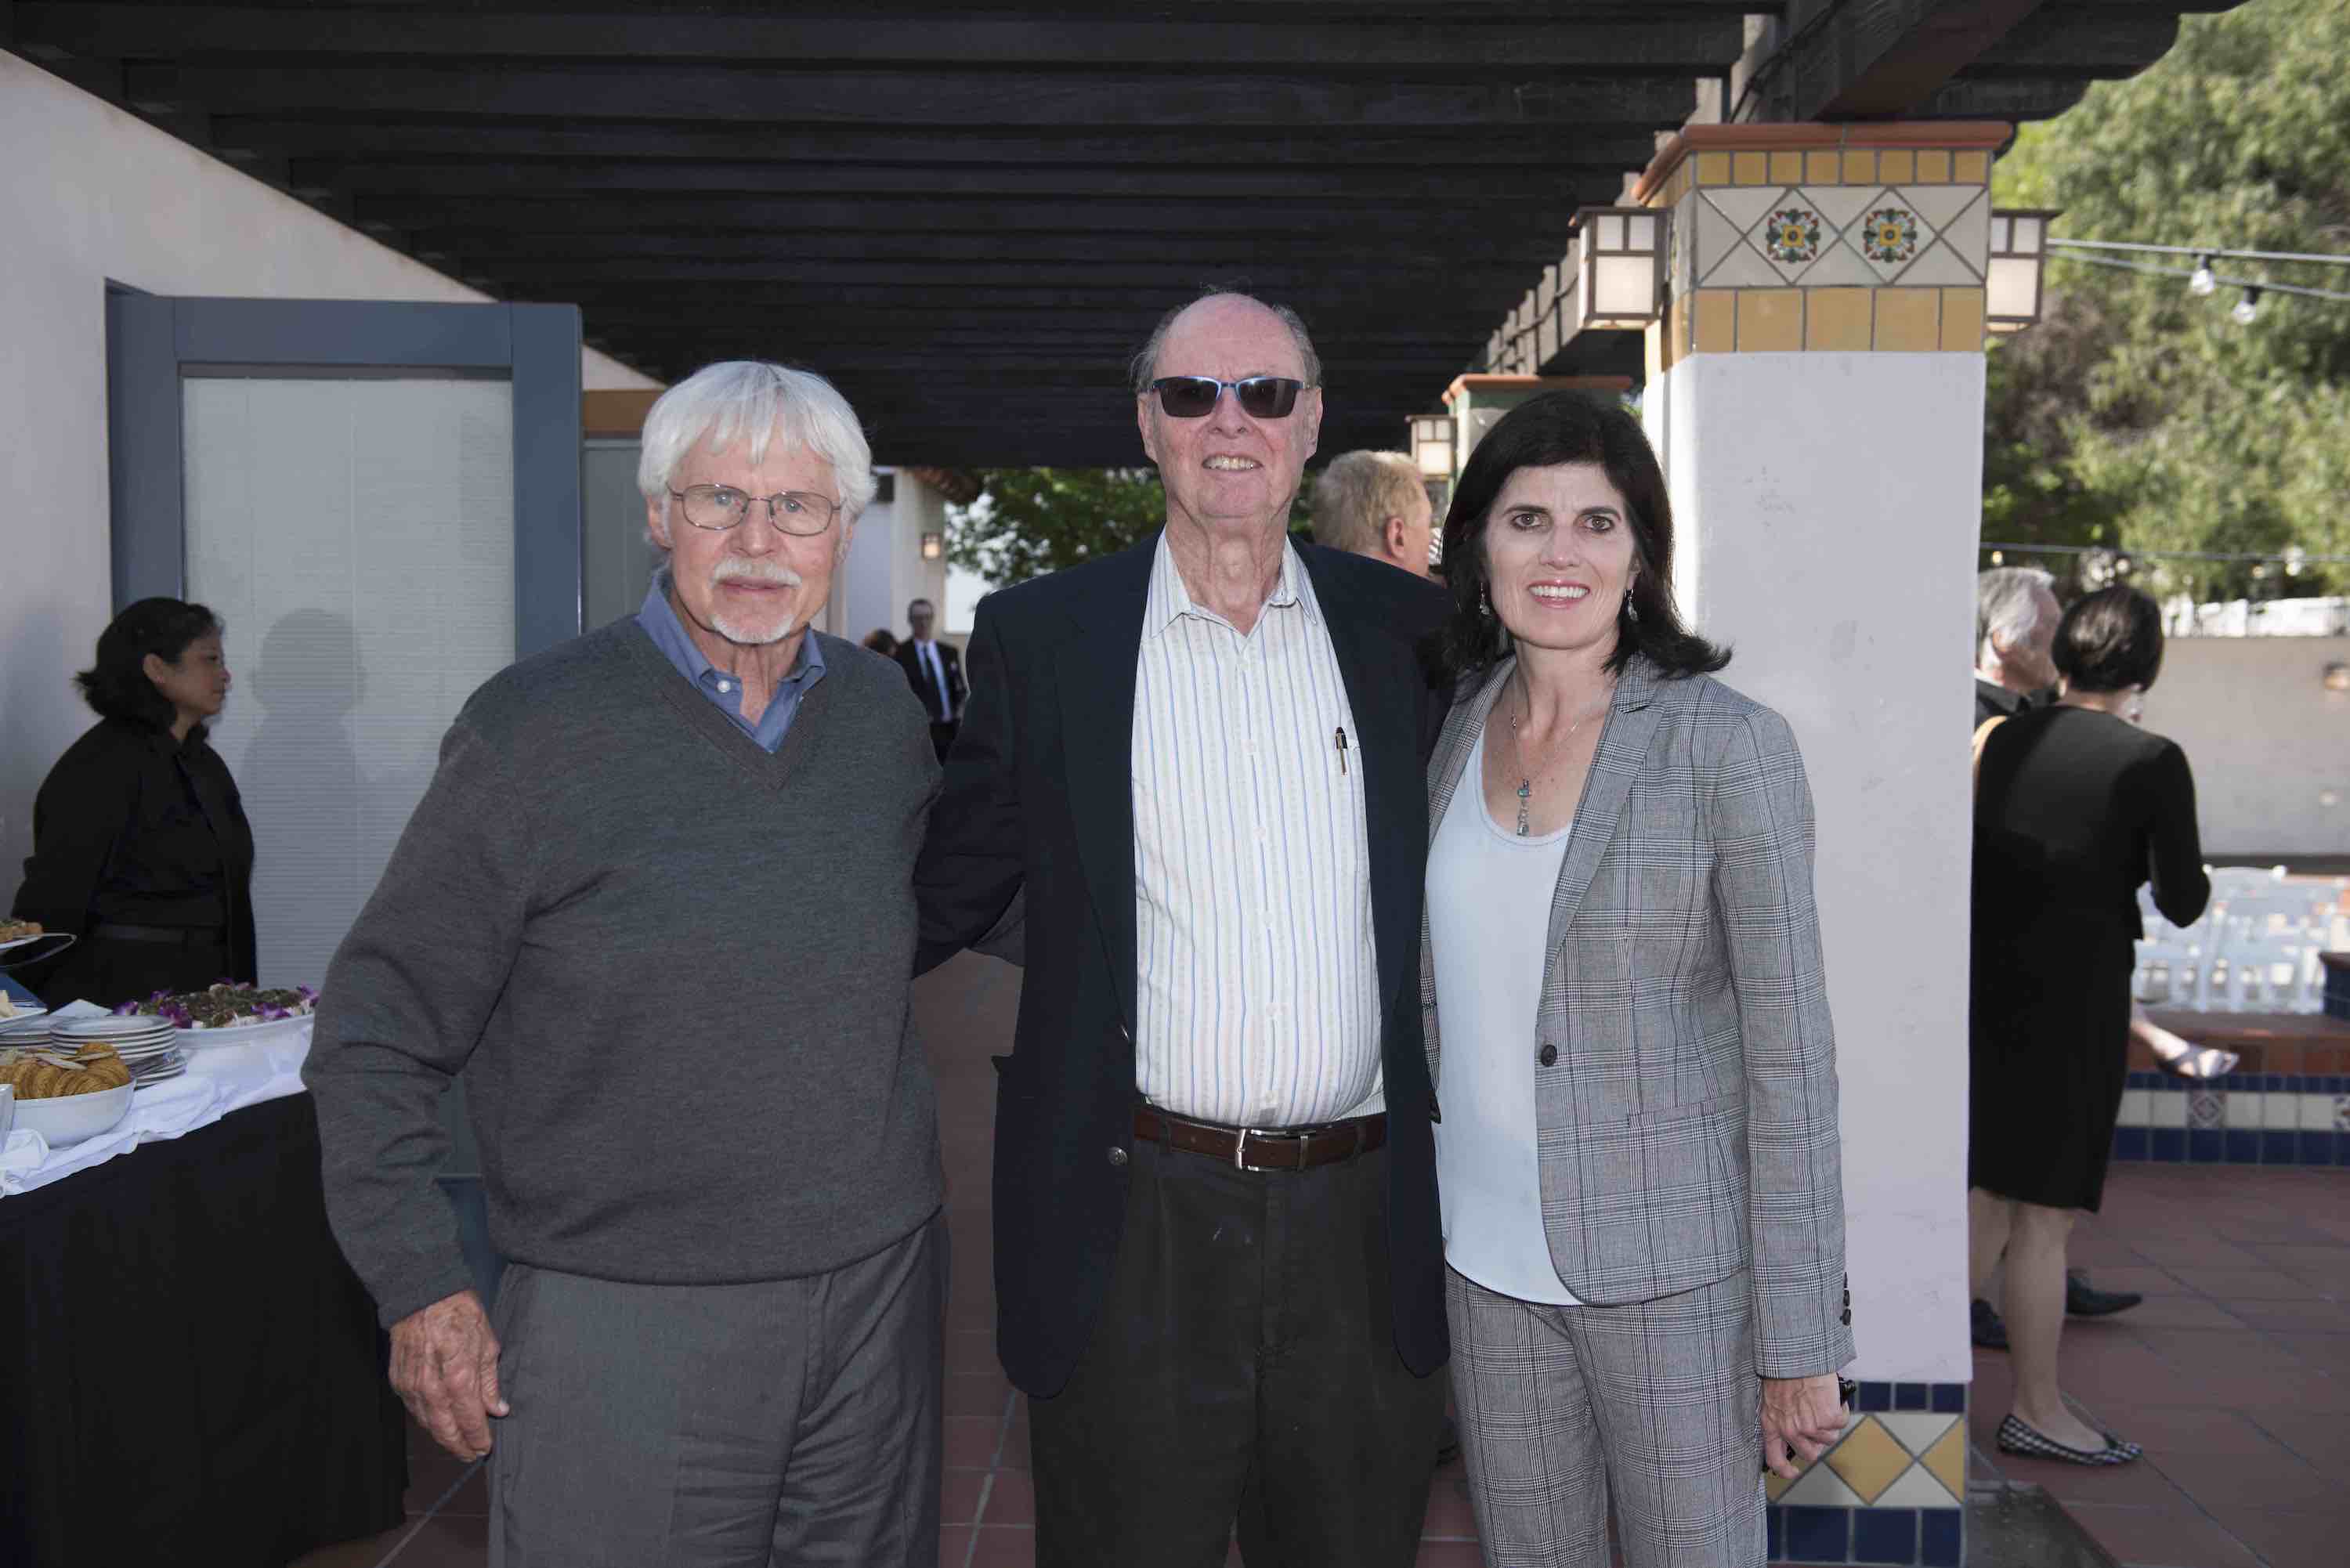 Dr. Hansen, Dr. de Graaf, and Dr. Fousekis stand side by side in exterior courtyard at COPH's 50th anniversary event